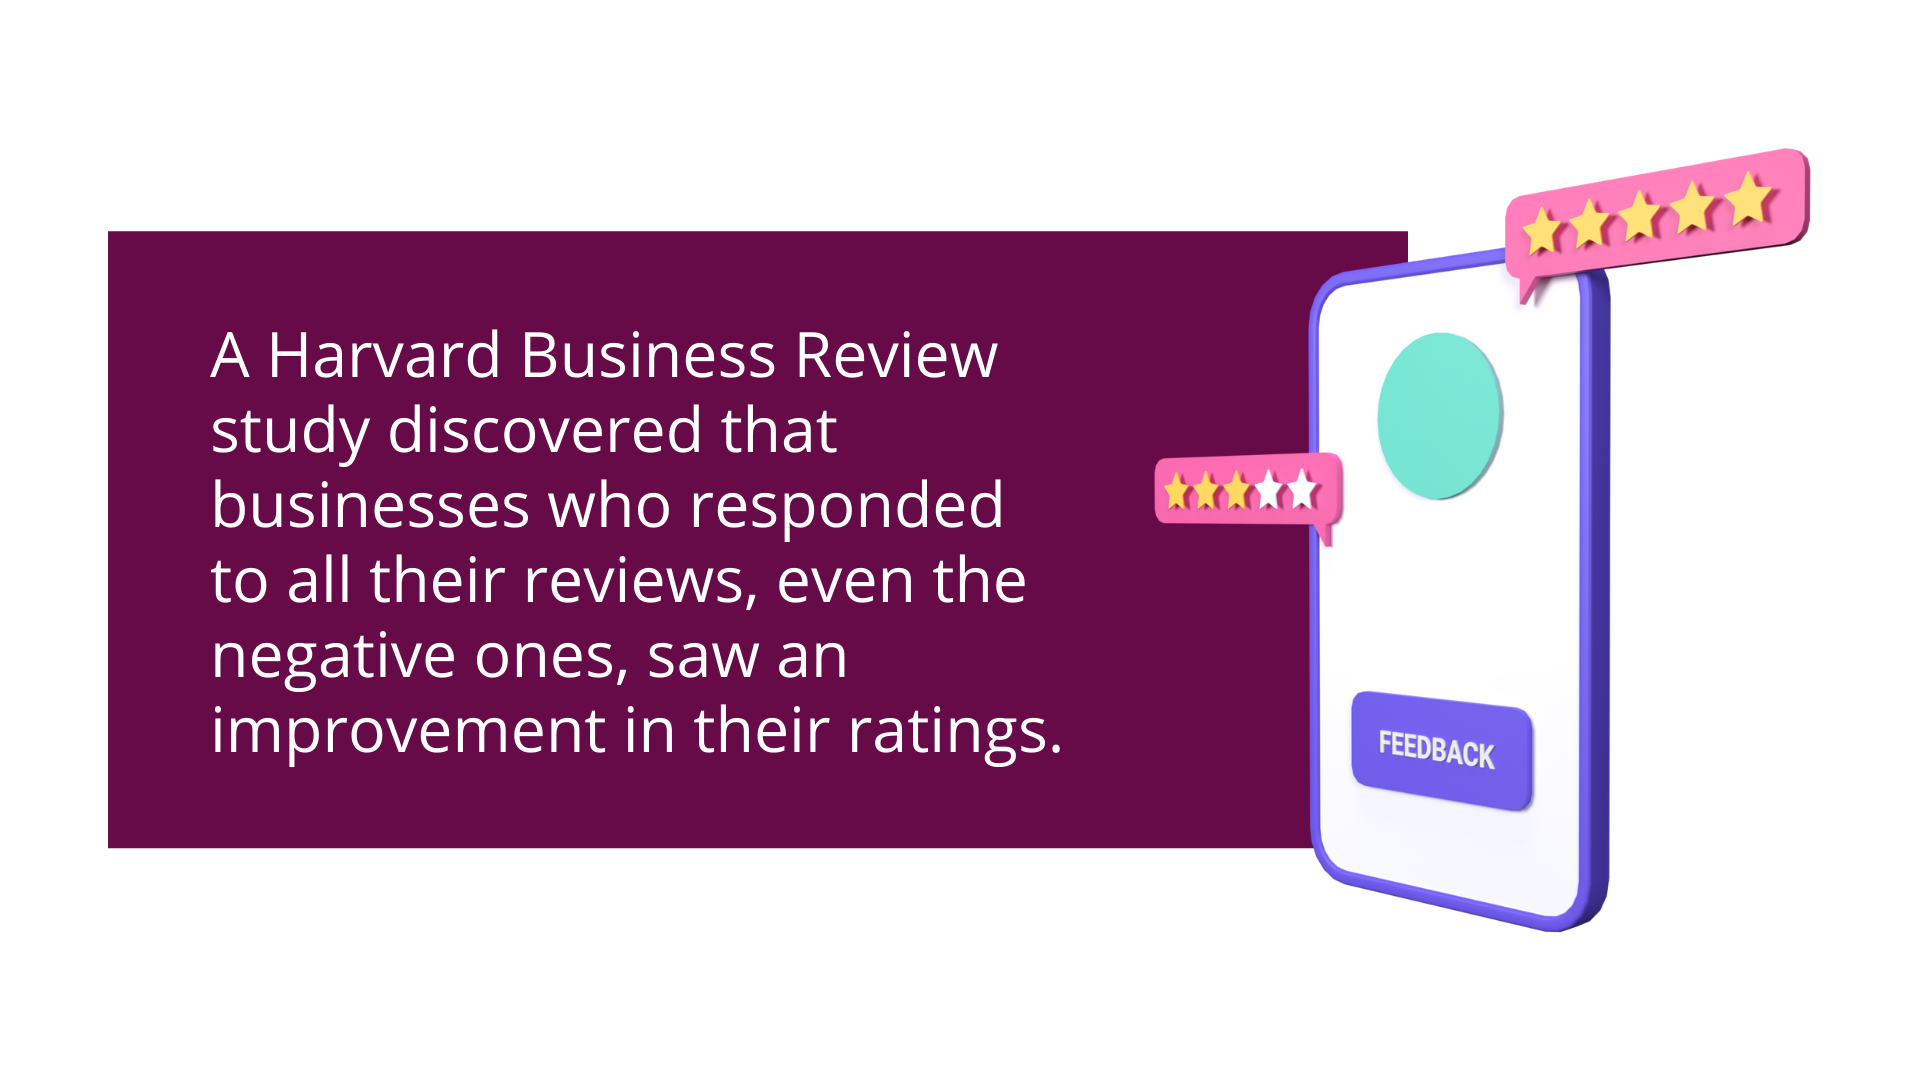 Online Reviews Should be Responded To